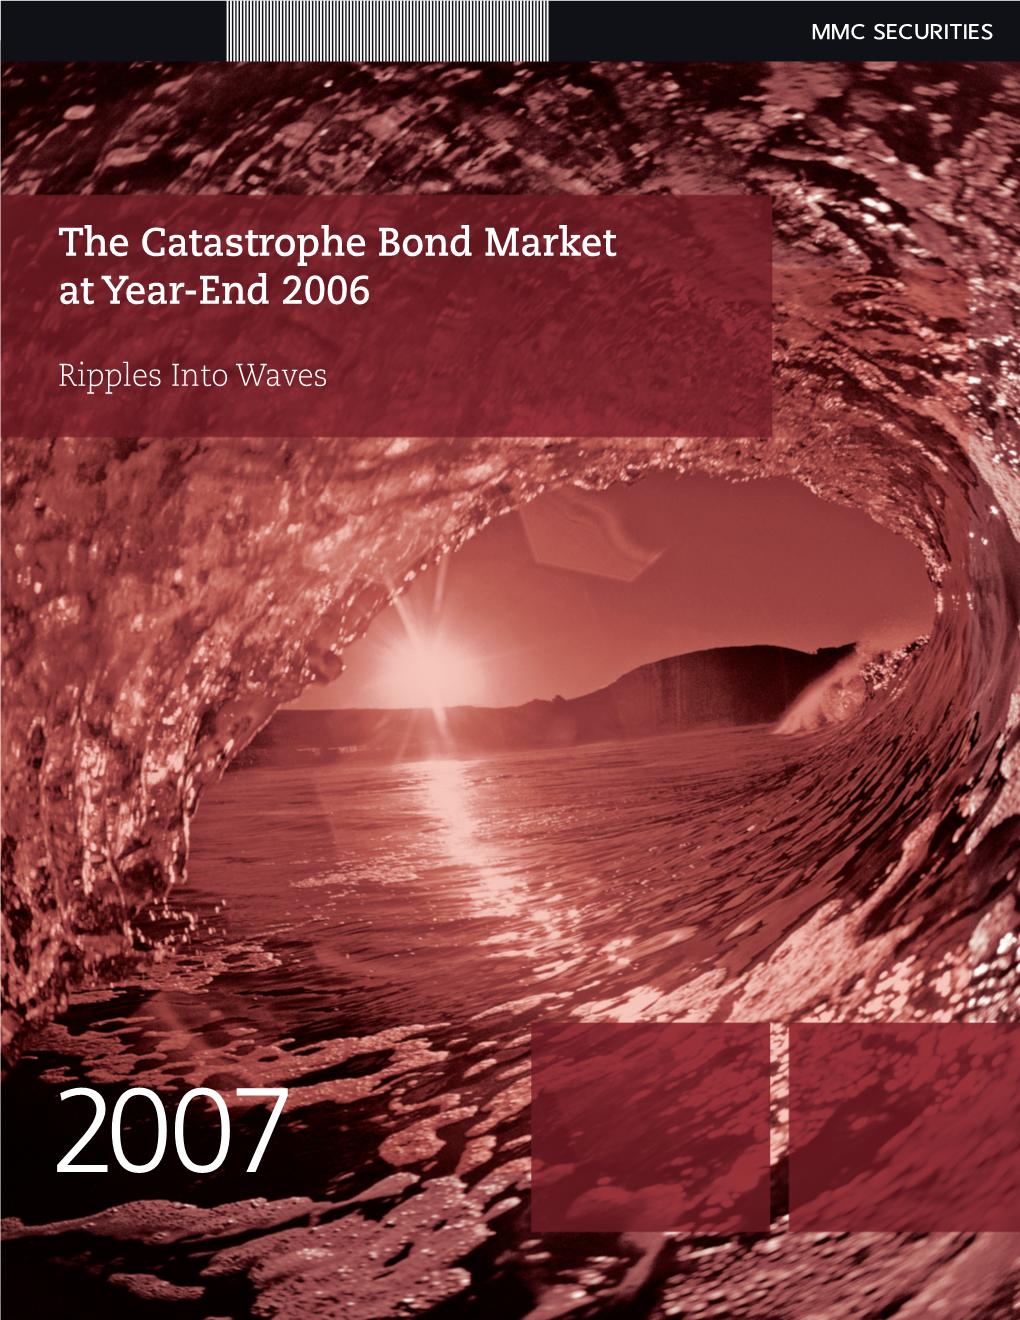 The Catastrophe Bond Market at Year-End 2006